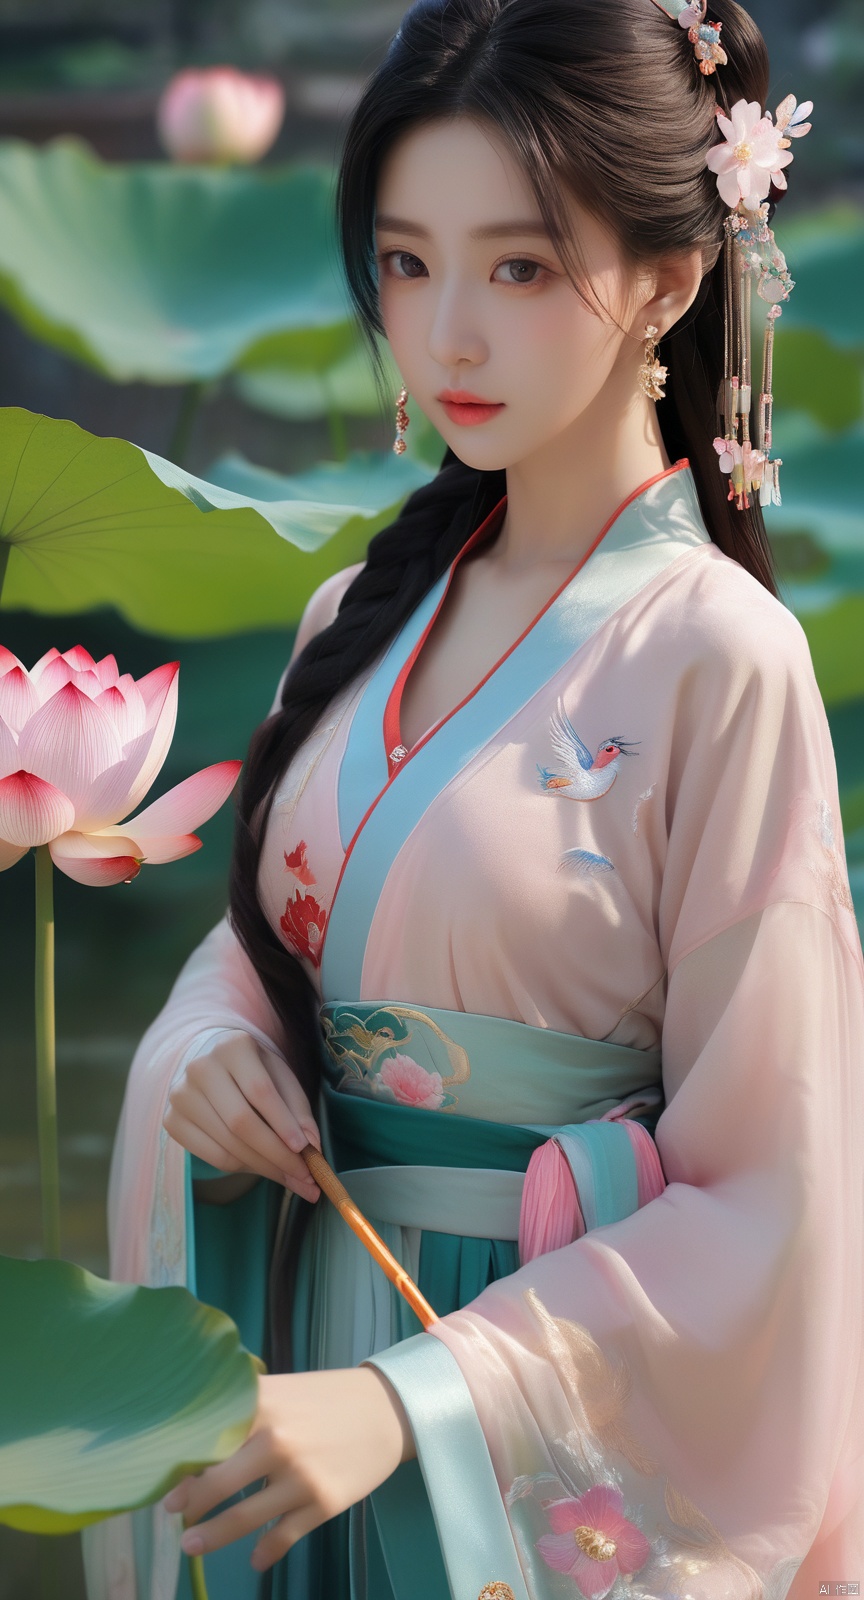  Best quality, Realistic, photorealistic, masterpiece, extremely detailed CG unity 8k wallpaper, best illumination, best shadow, huge filesize ,(huge breasts:2.3) incredibly absurdres, absurdres, looking at viewer, transparent, smog, gauze, vase, petals, room, ancient Chinese style, detailed background, wide shot background,
(((1gilr,black hair))),(Sitting on the lotus pond porch:1.39) ,(huge breasts:2.4),(A pond full of pink lotus flowers:1.3),close up of 1girl,Hairpins,hair ornament,hair wings,slim,narrow waist,(huge breasts:2.5),perfect eyes,beautiful perfect face,pleasant smile,perfect female figure,detailed skin,charming,alluring,seductive,erotic,enchanting,delicate pattern,detailed complex and rich exquisite clothing detail,delicate intricate fabrics,
Morning Serenade In the gentle morning glow, (a woman in a pink lotus-patterned Hanfu stands in an indoor courtyard:1.26),(Chinese traditional dragon and phoenix embroidered Hanfu:1.3), admiring the tranquil garden scenery. The lotus-patterned Hanfu, embellished with silver-thread embroidery, is softly illuminated by the morning light. The light mint green Hanfu imparts a sense of calm and freshness, adorned with delicate lotus patterns, with a blurred background to enhance the peaceful atmosphere,(huge breasts:2.7), puregirl, g009